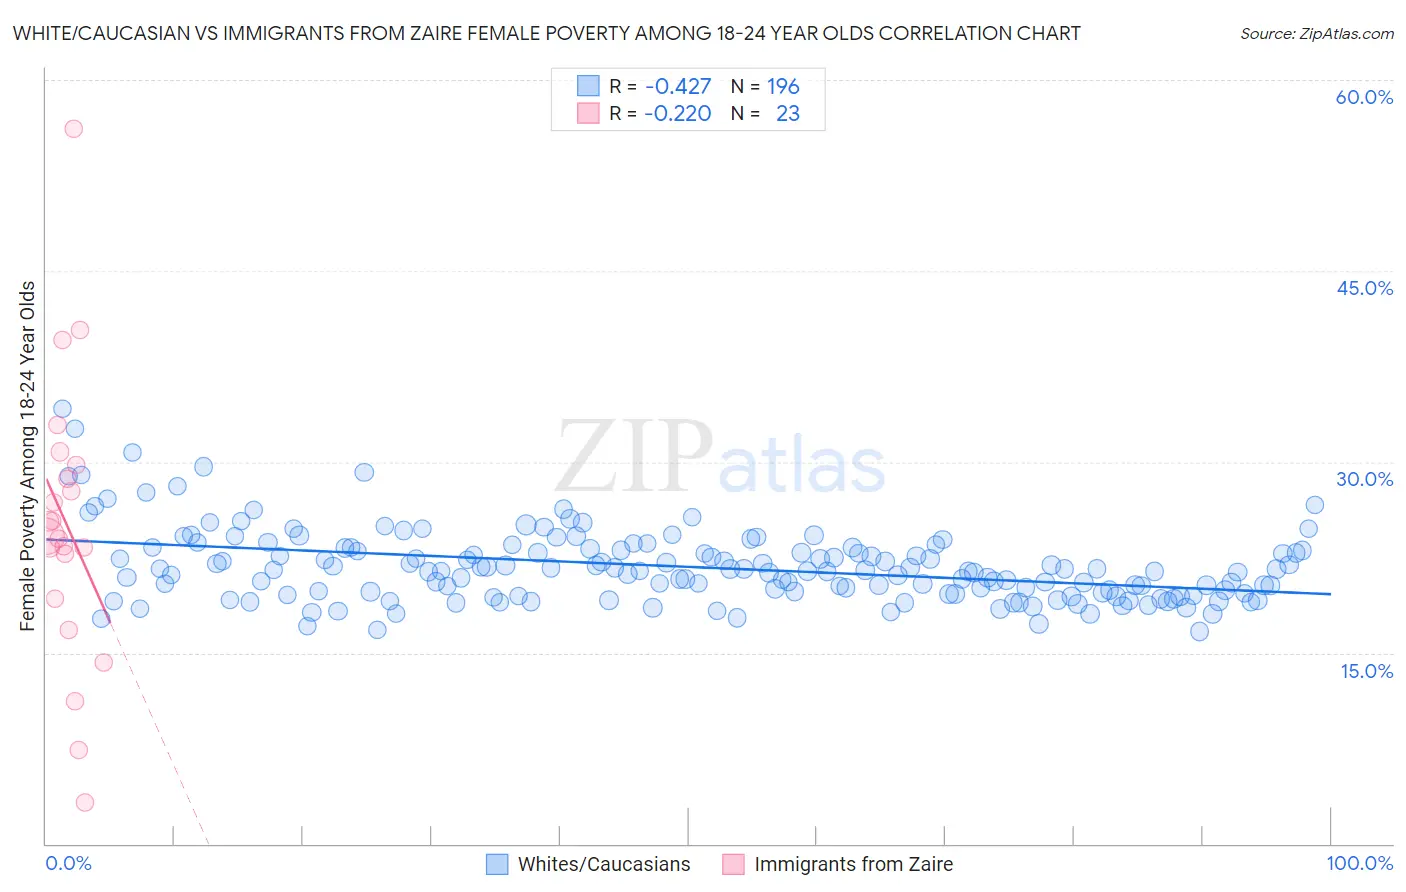 White/Caucasian vs Immigrants from Zaire Female Poverty Among 18-24 Year Olds